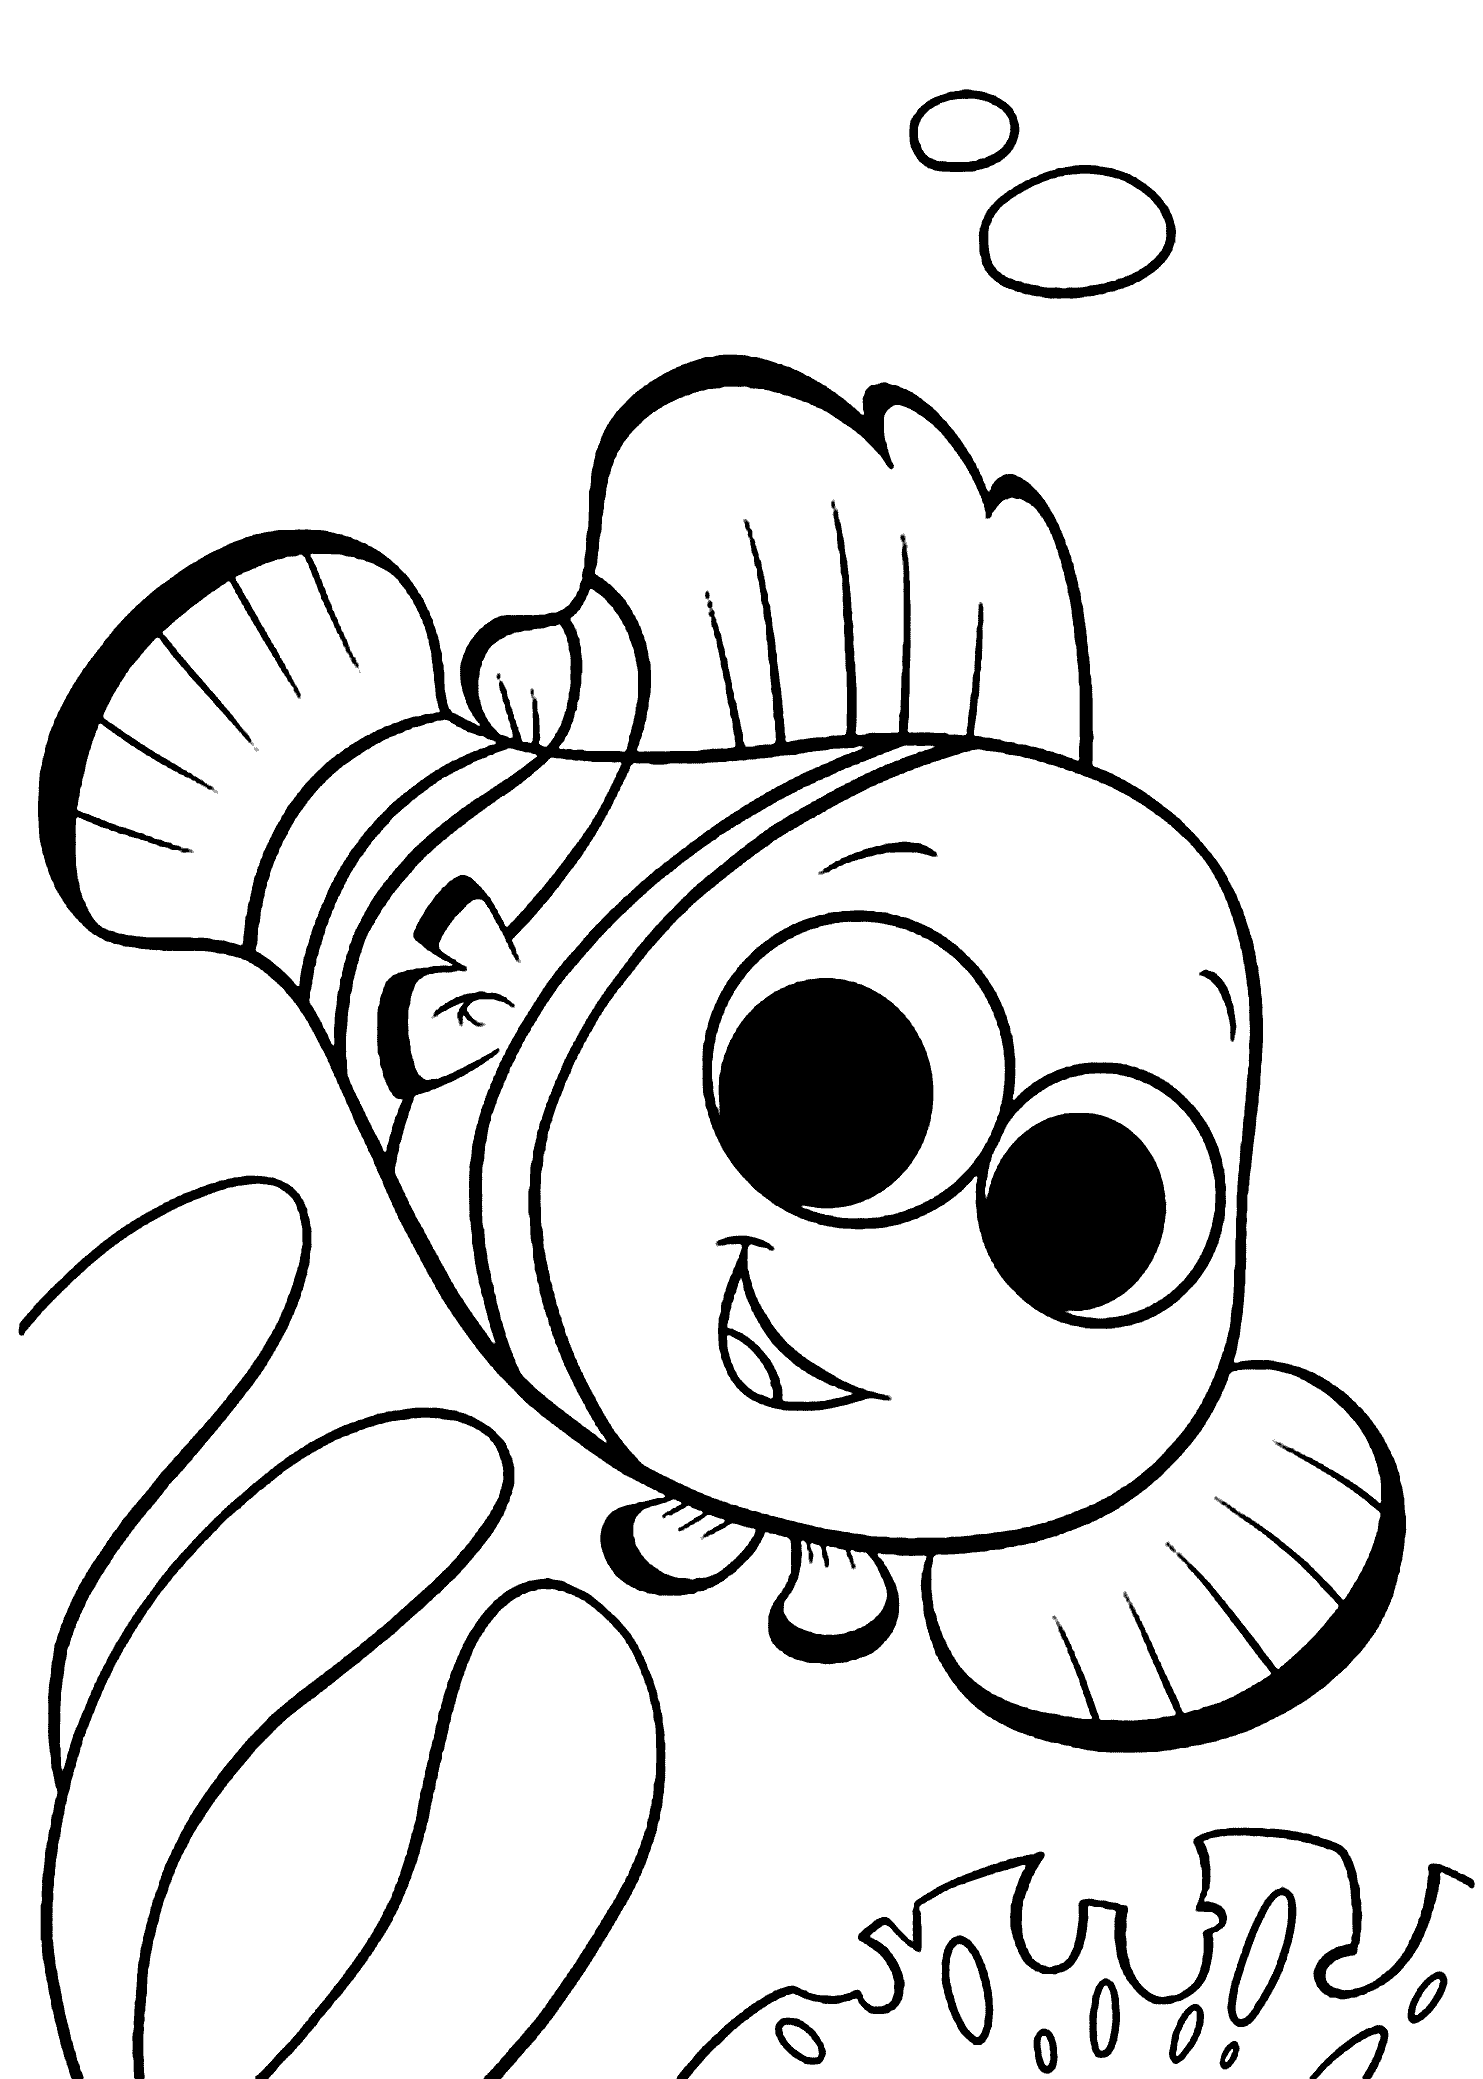 nemo coloring sheet finding nemo coloring pages to download and print for free sheet coloring nemo 